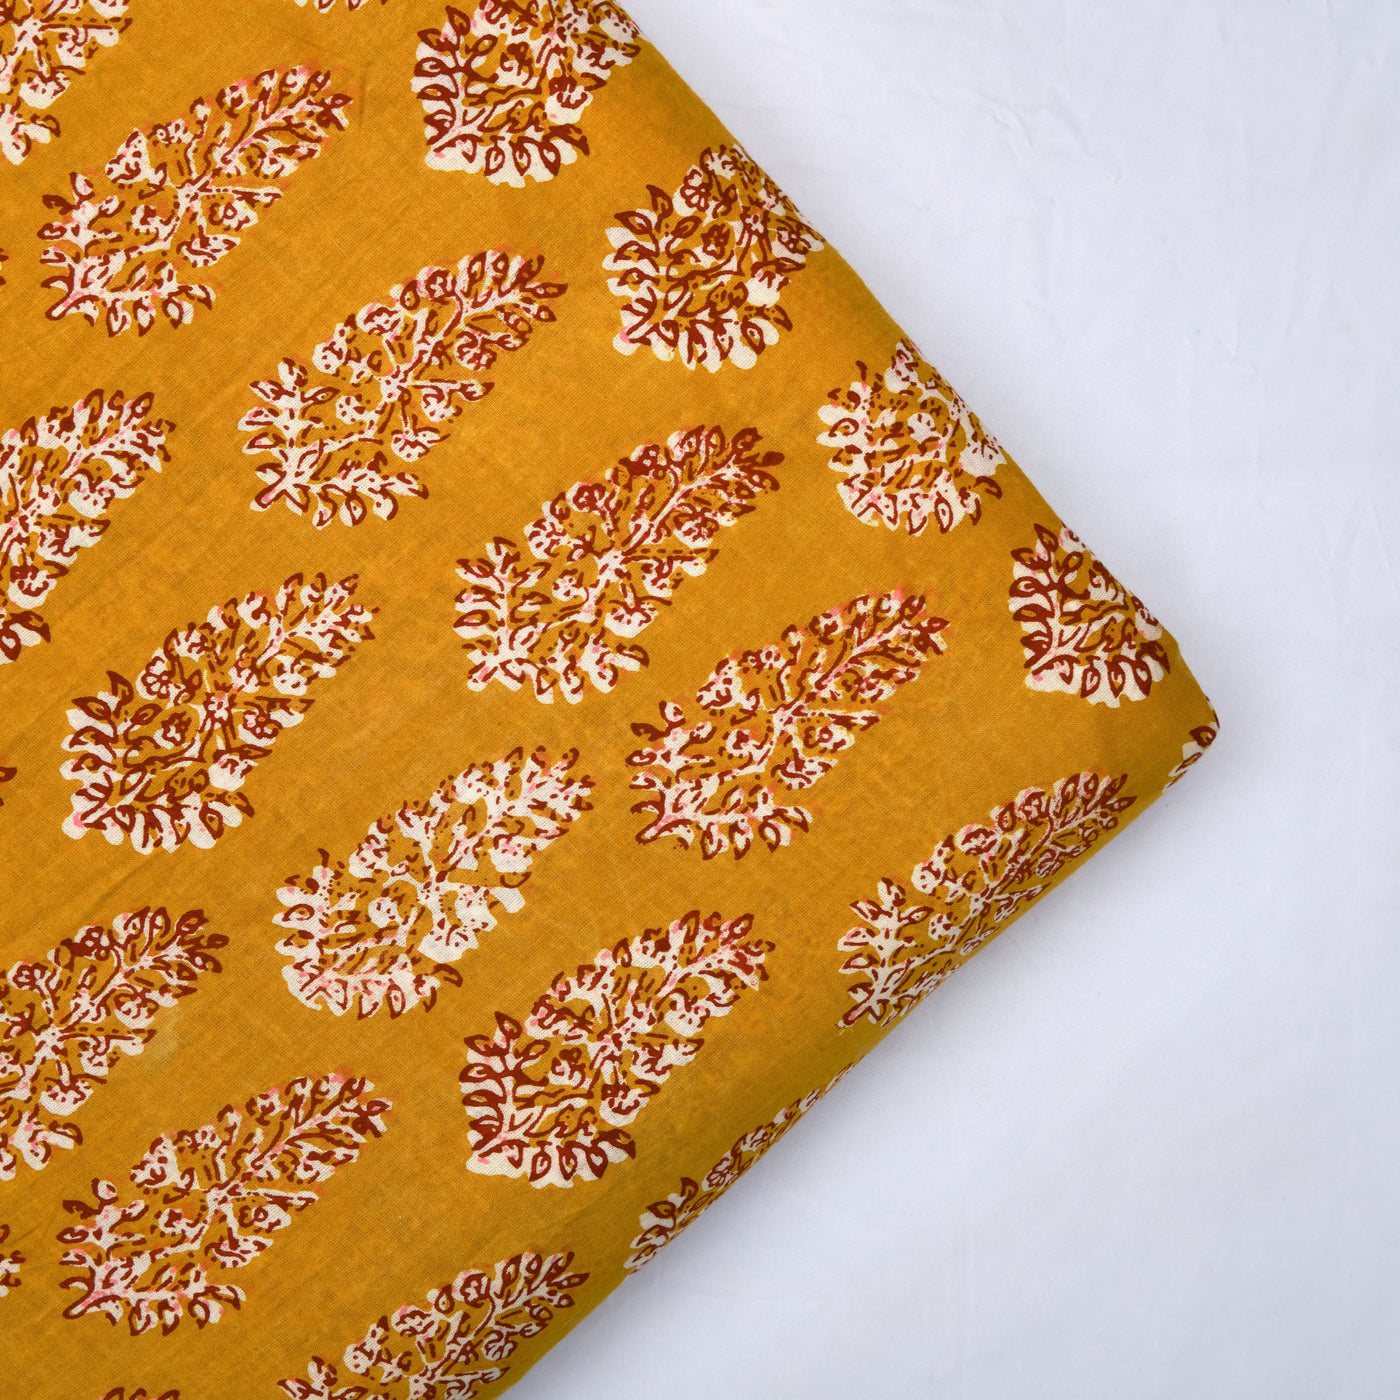 Vintage Yellow, Red and White Indian Printed 100% Pure Cotton Cloth, Fabric by the yard, Fabric By the Yard, Women's Clothing Curtain Pillow